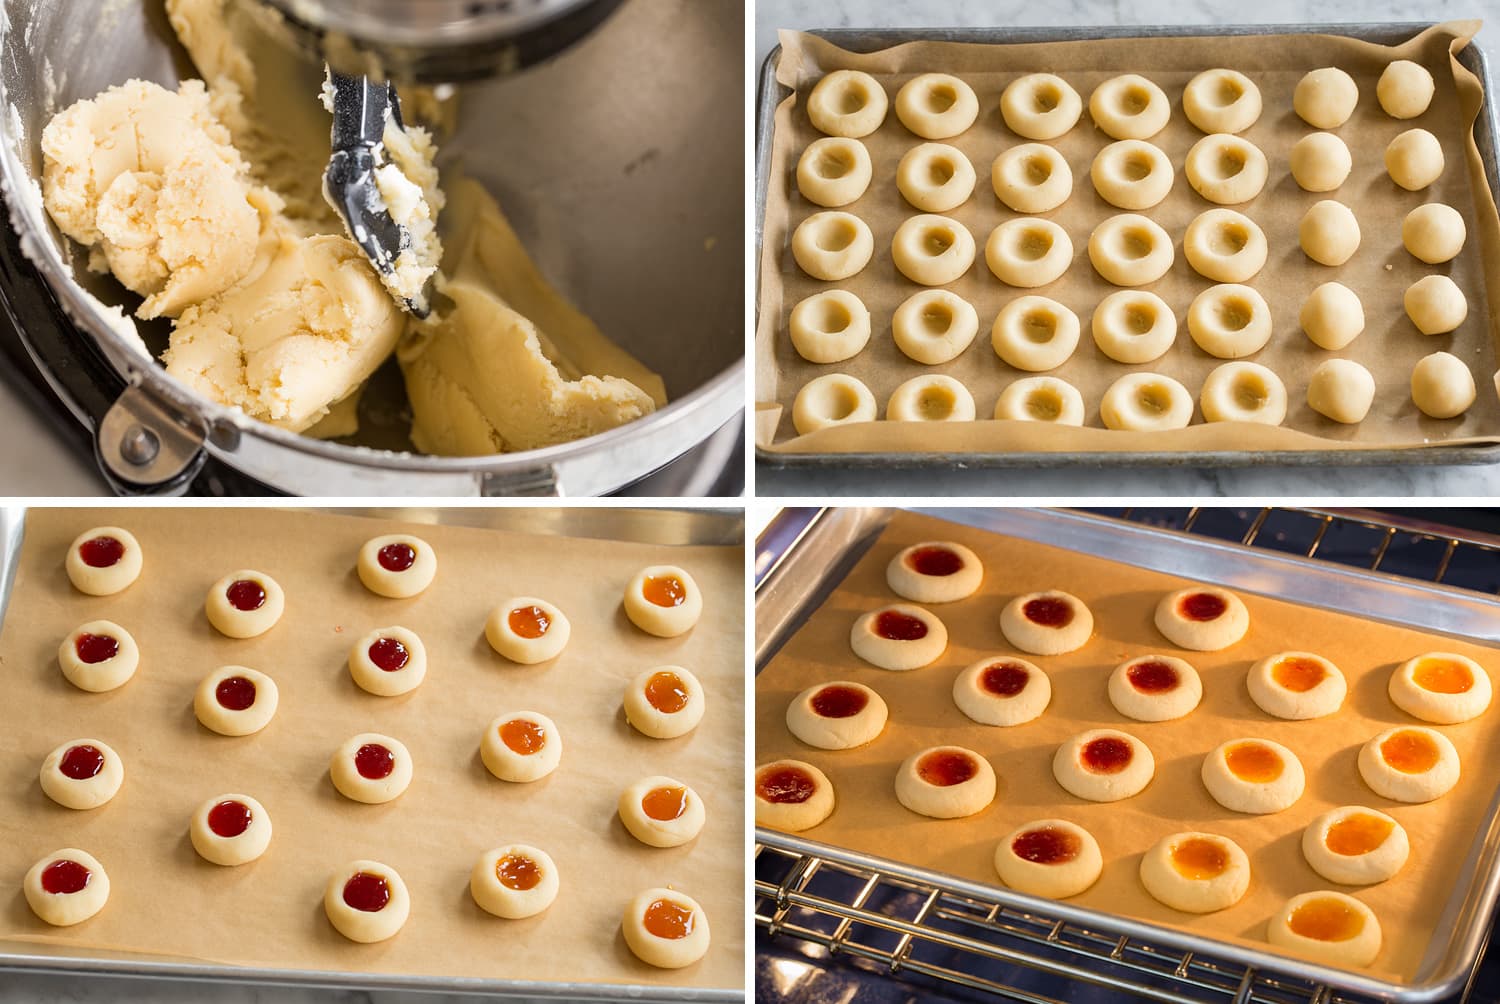 Steps of shaping thumbprint cookies, adding jam and baking.